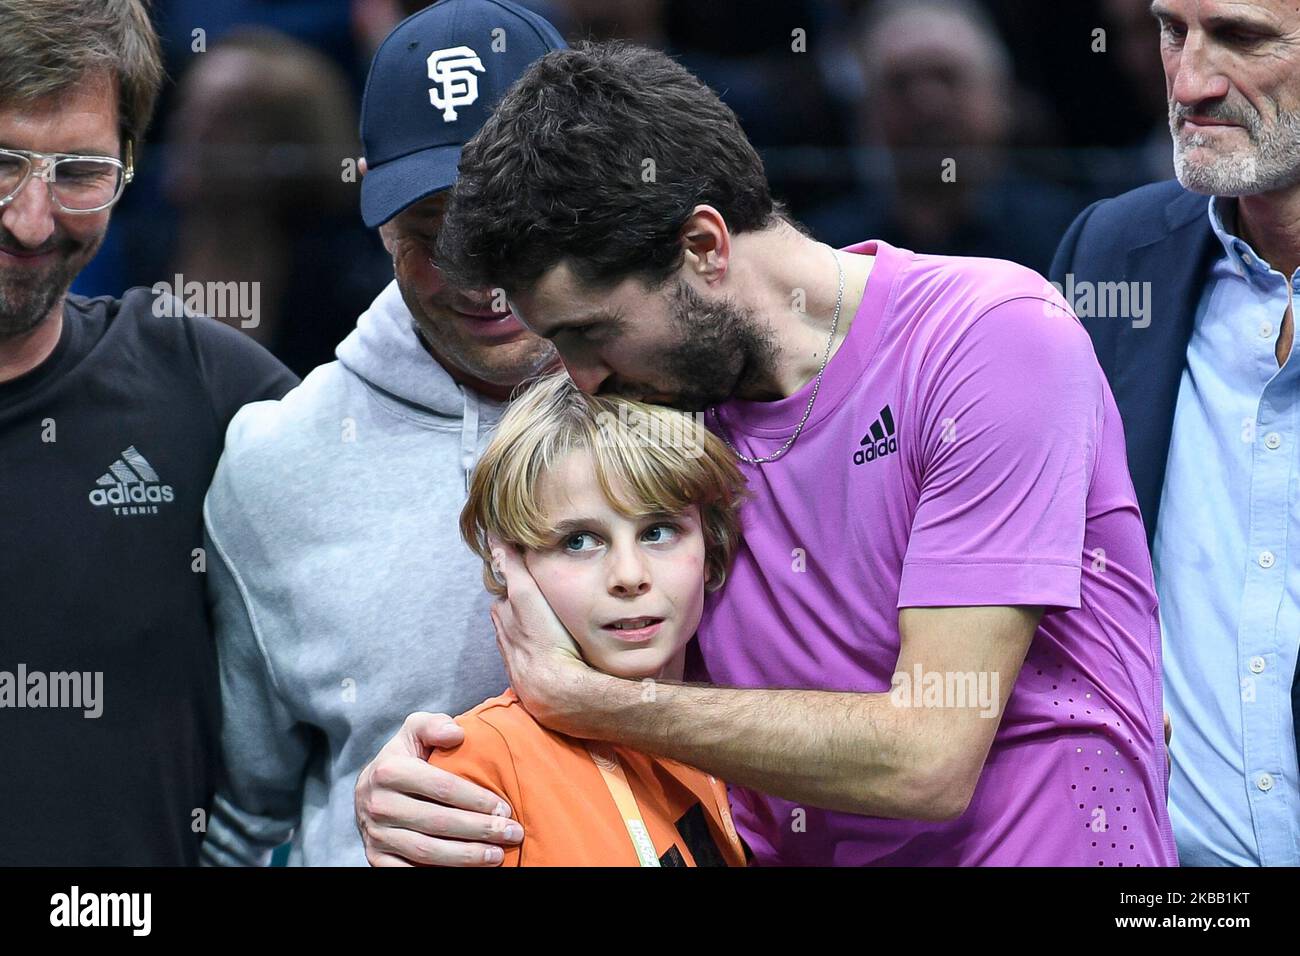 Gilles simon france hi-res stock photography and images - Alamy